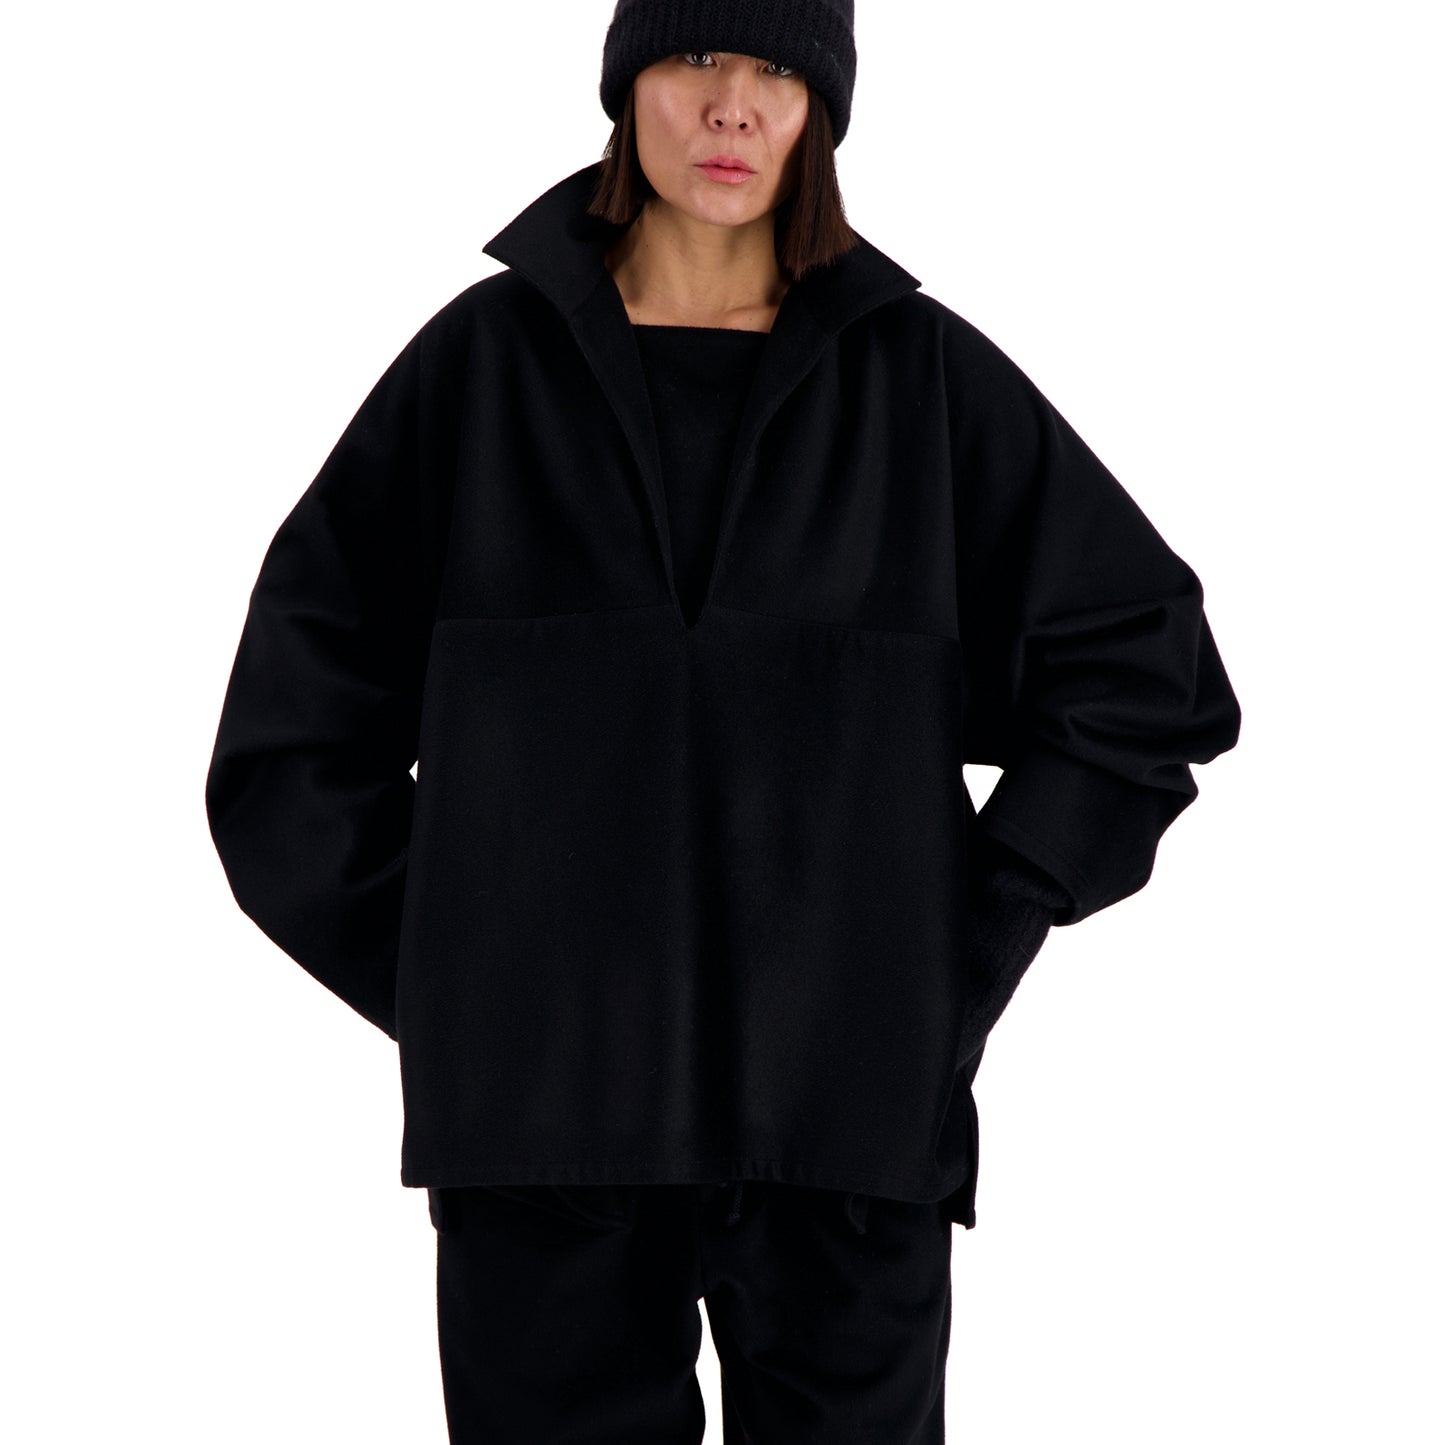 Donald Unlined Midweight Cashmere Anorak Black